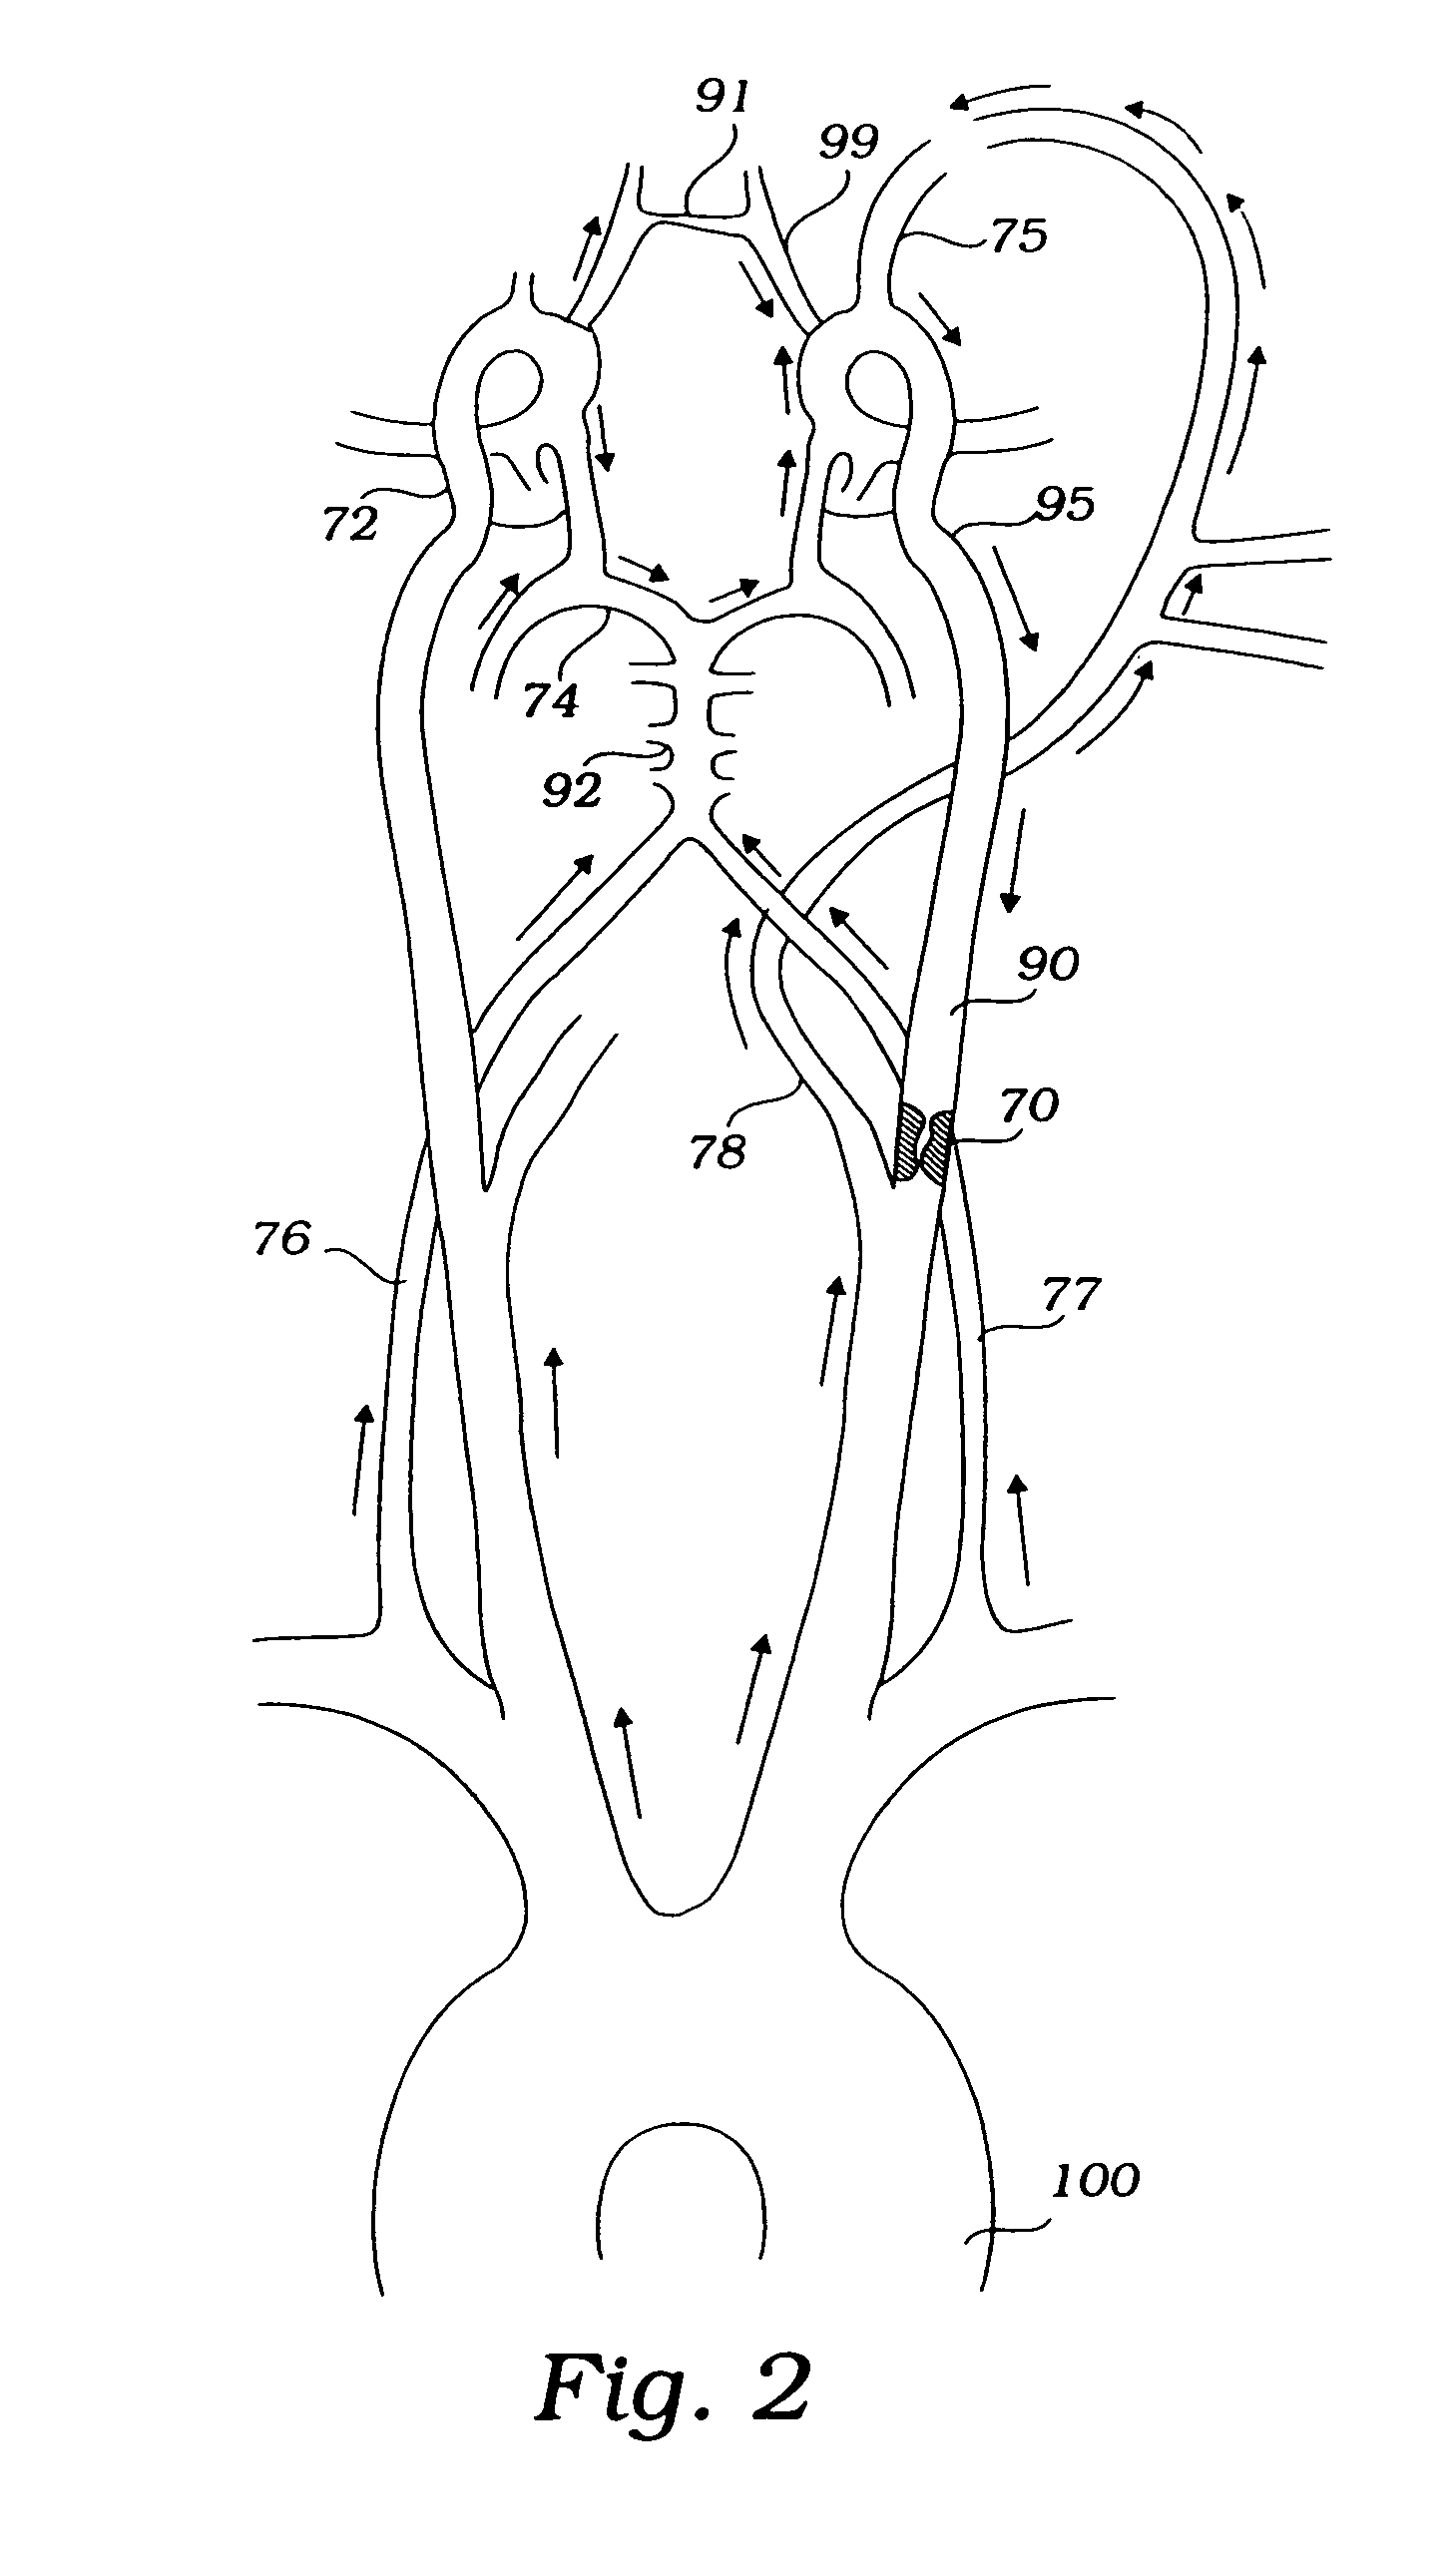 Devices and methods for preventing distal embolization using flow reversal by partial occlusion of the brachiocephalic artery